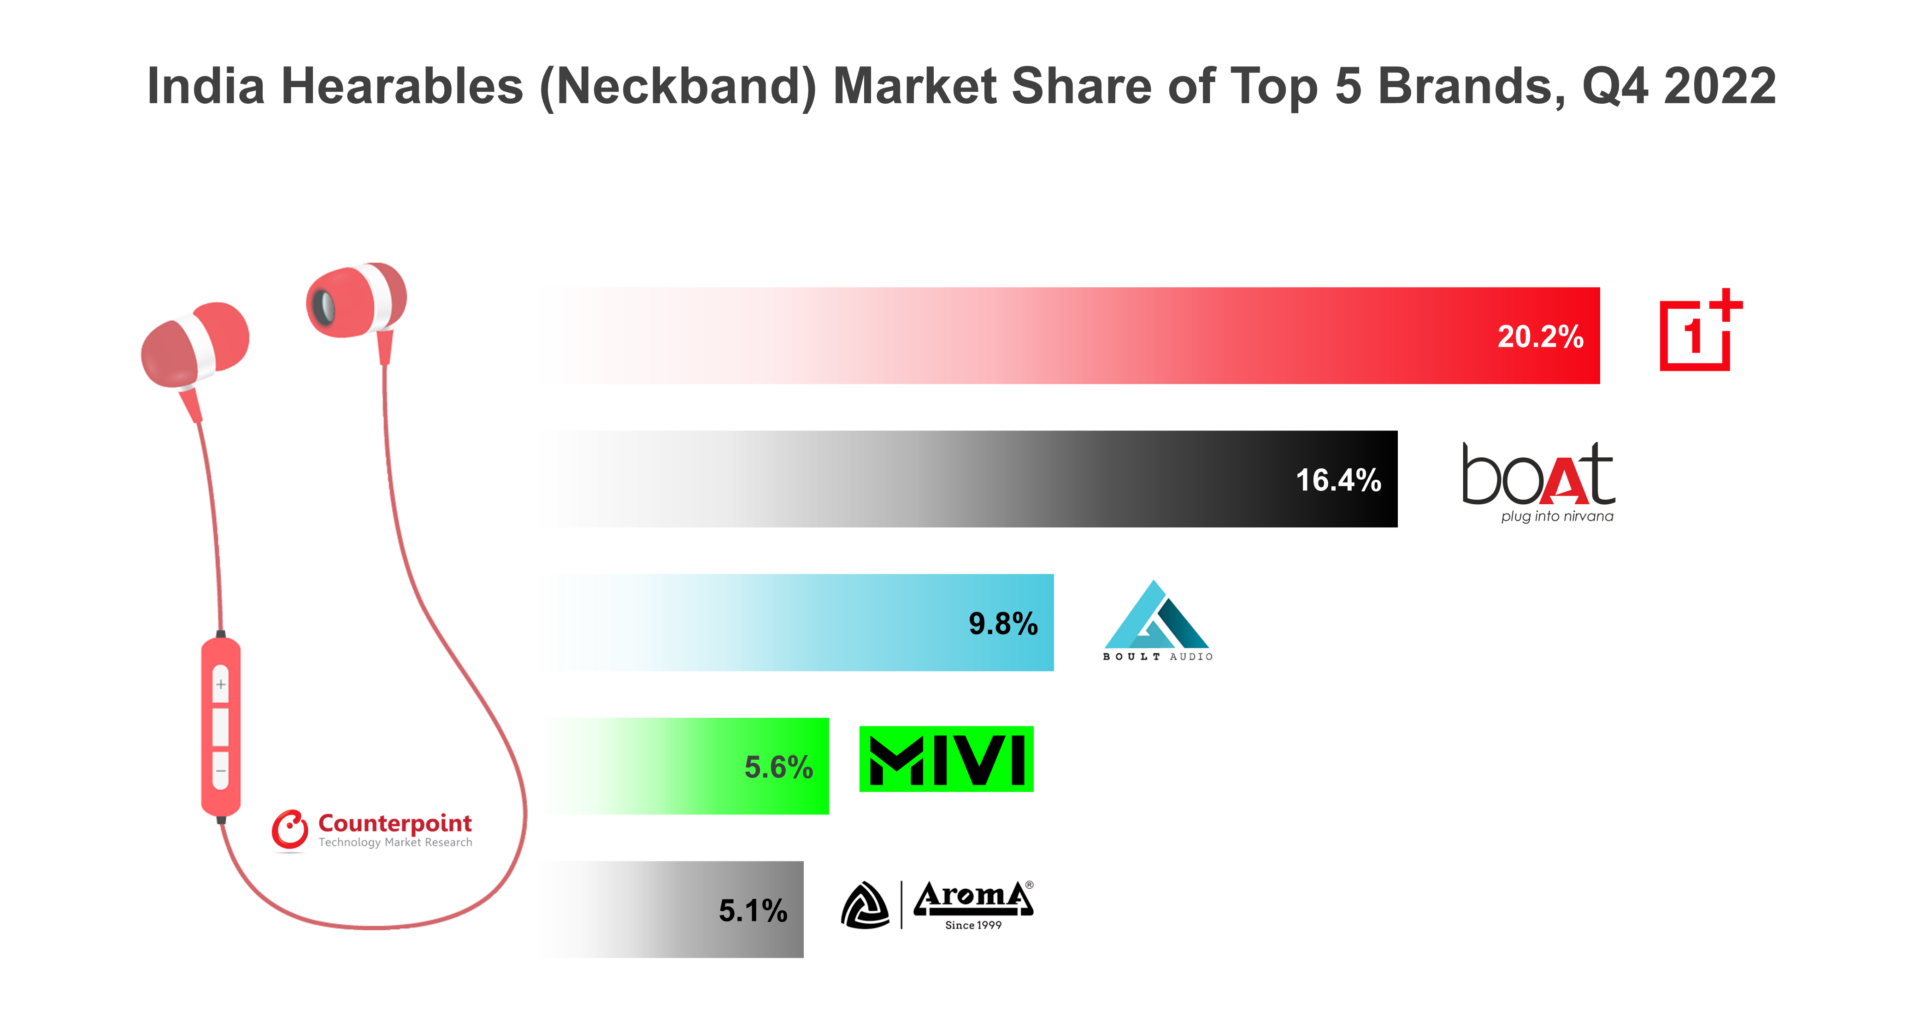 India Hearables (Neckband) Market Share of Top 5 Brands, Q4 2022